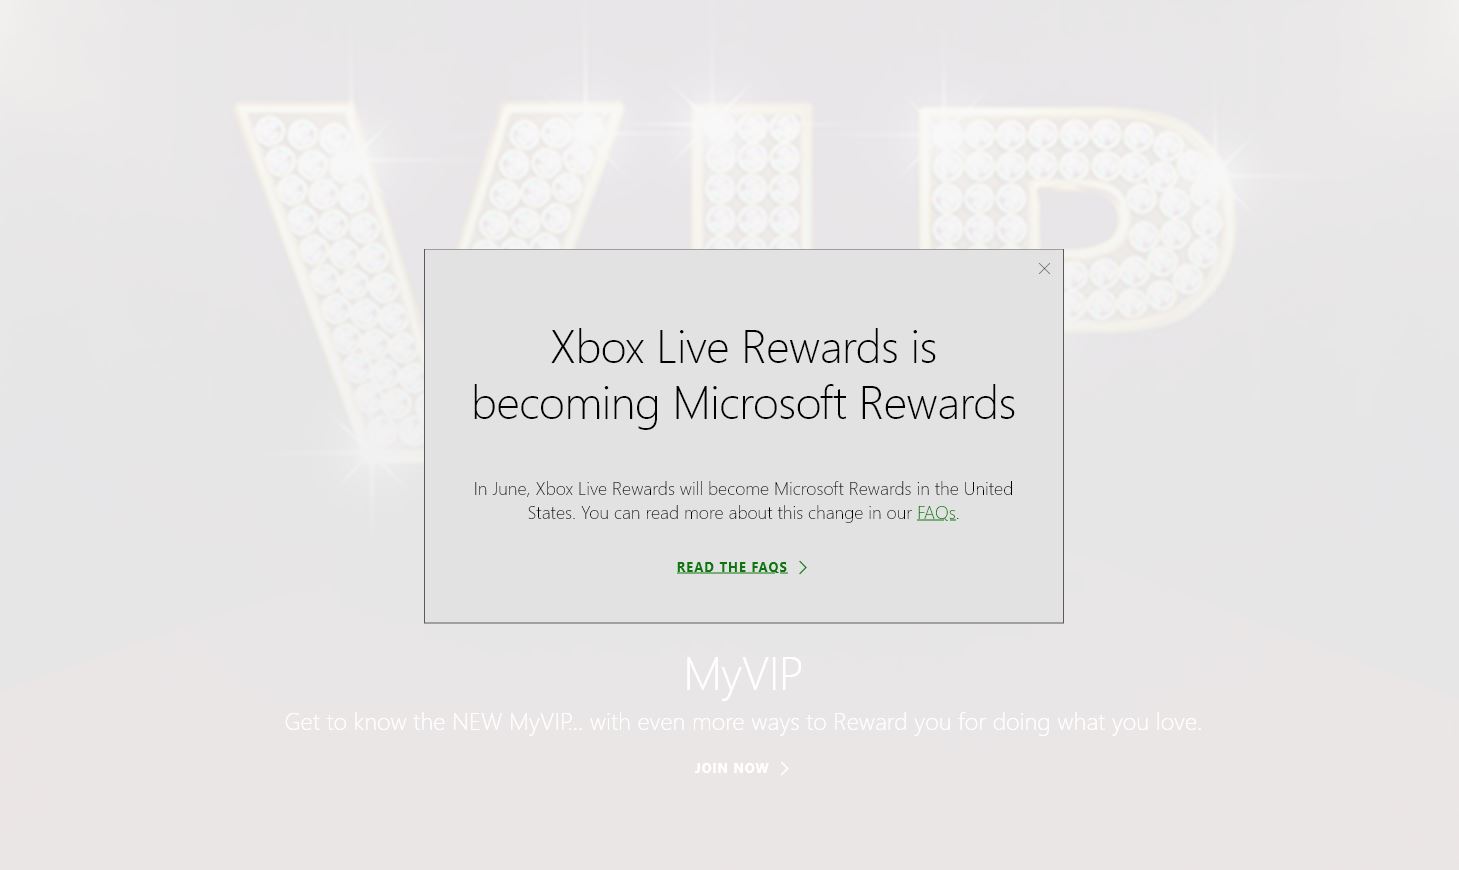 Xbox Live Rewards to transition to Microsoft Rewards in June